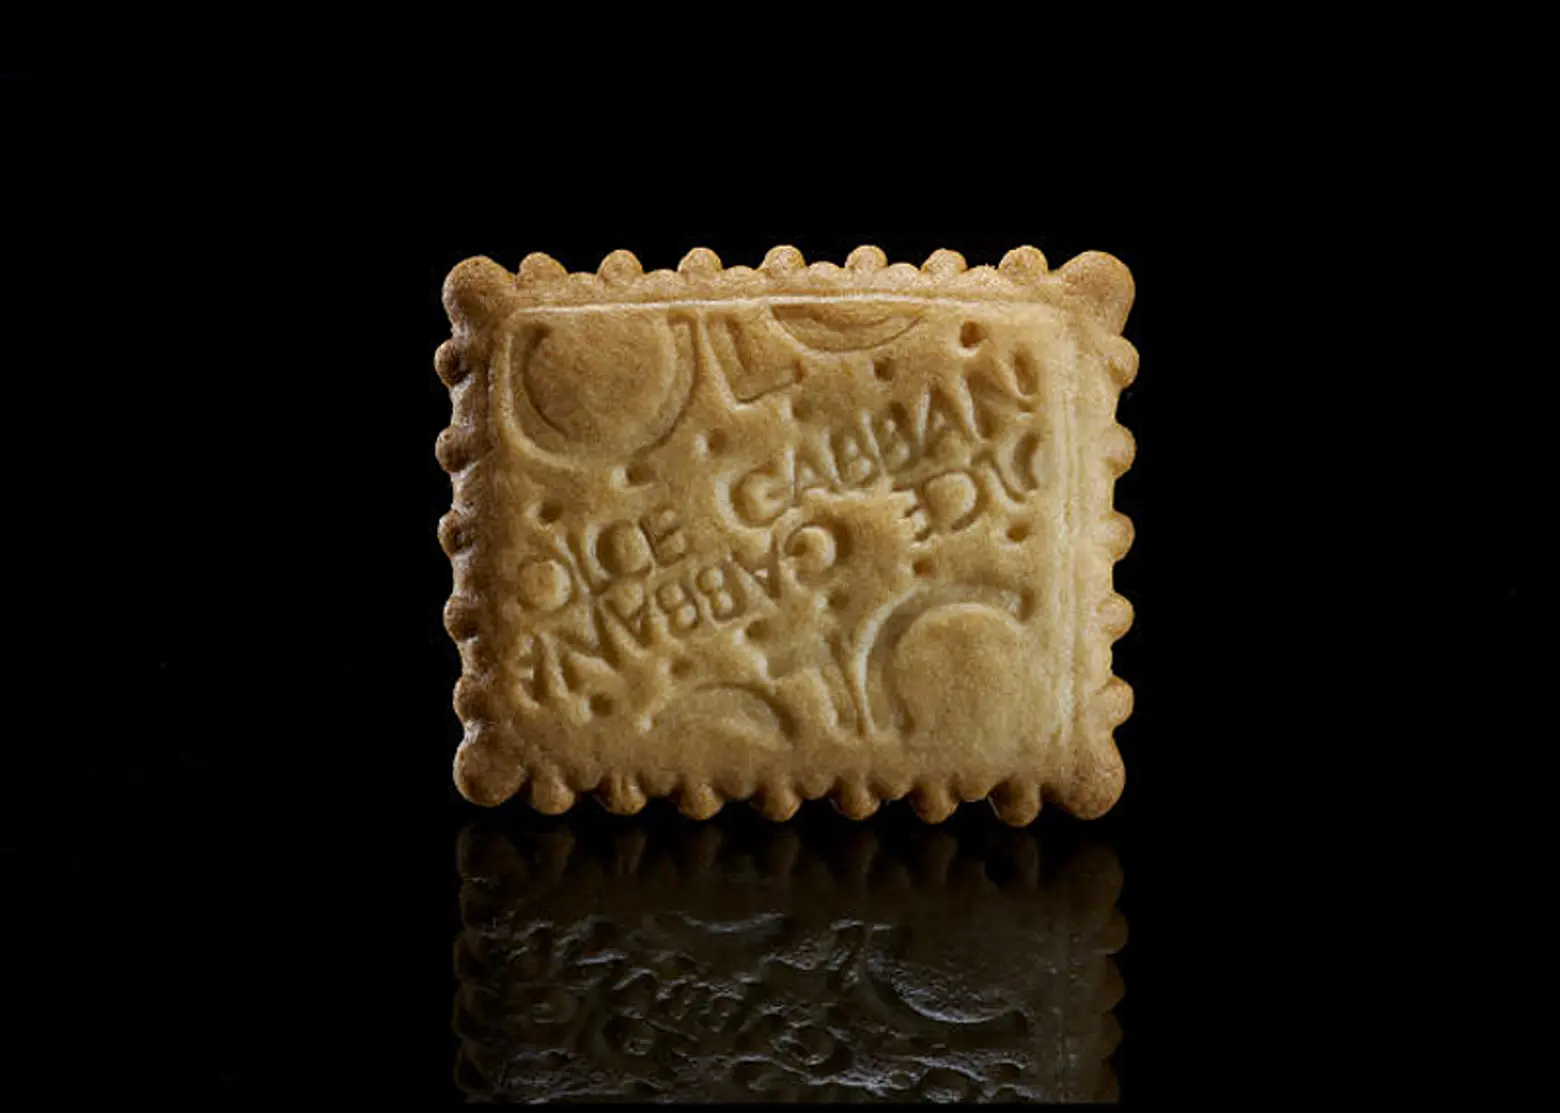 luxury branding, Gucci pickles, Apple iMilk, Paddy Mergui, San Francisco's Museum of Craft & Design, everyday foods as luxury products, Wheat is Wheat is Wheat, Burberry ramen, consumer art, Dolce and Gabbana tea cookies